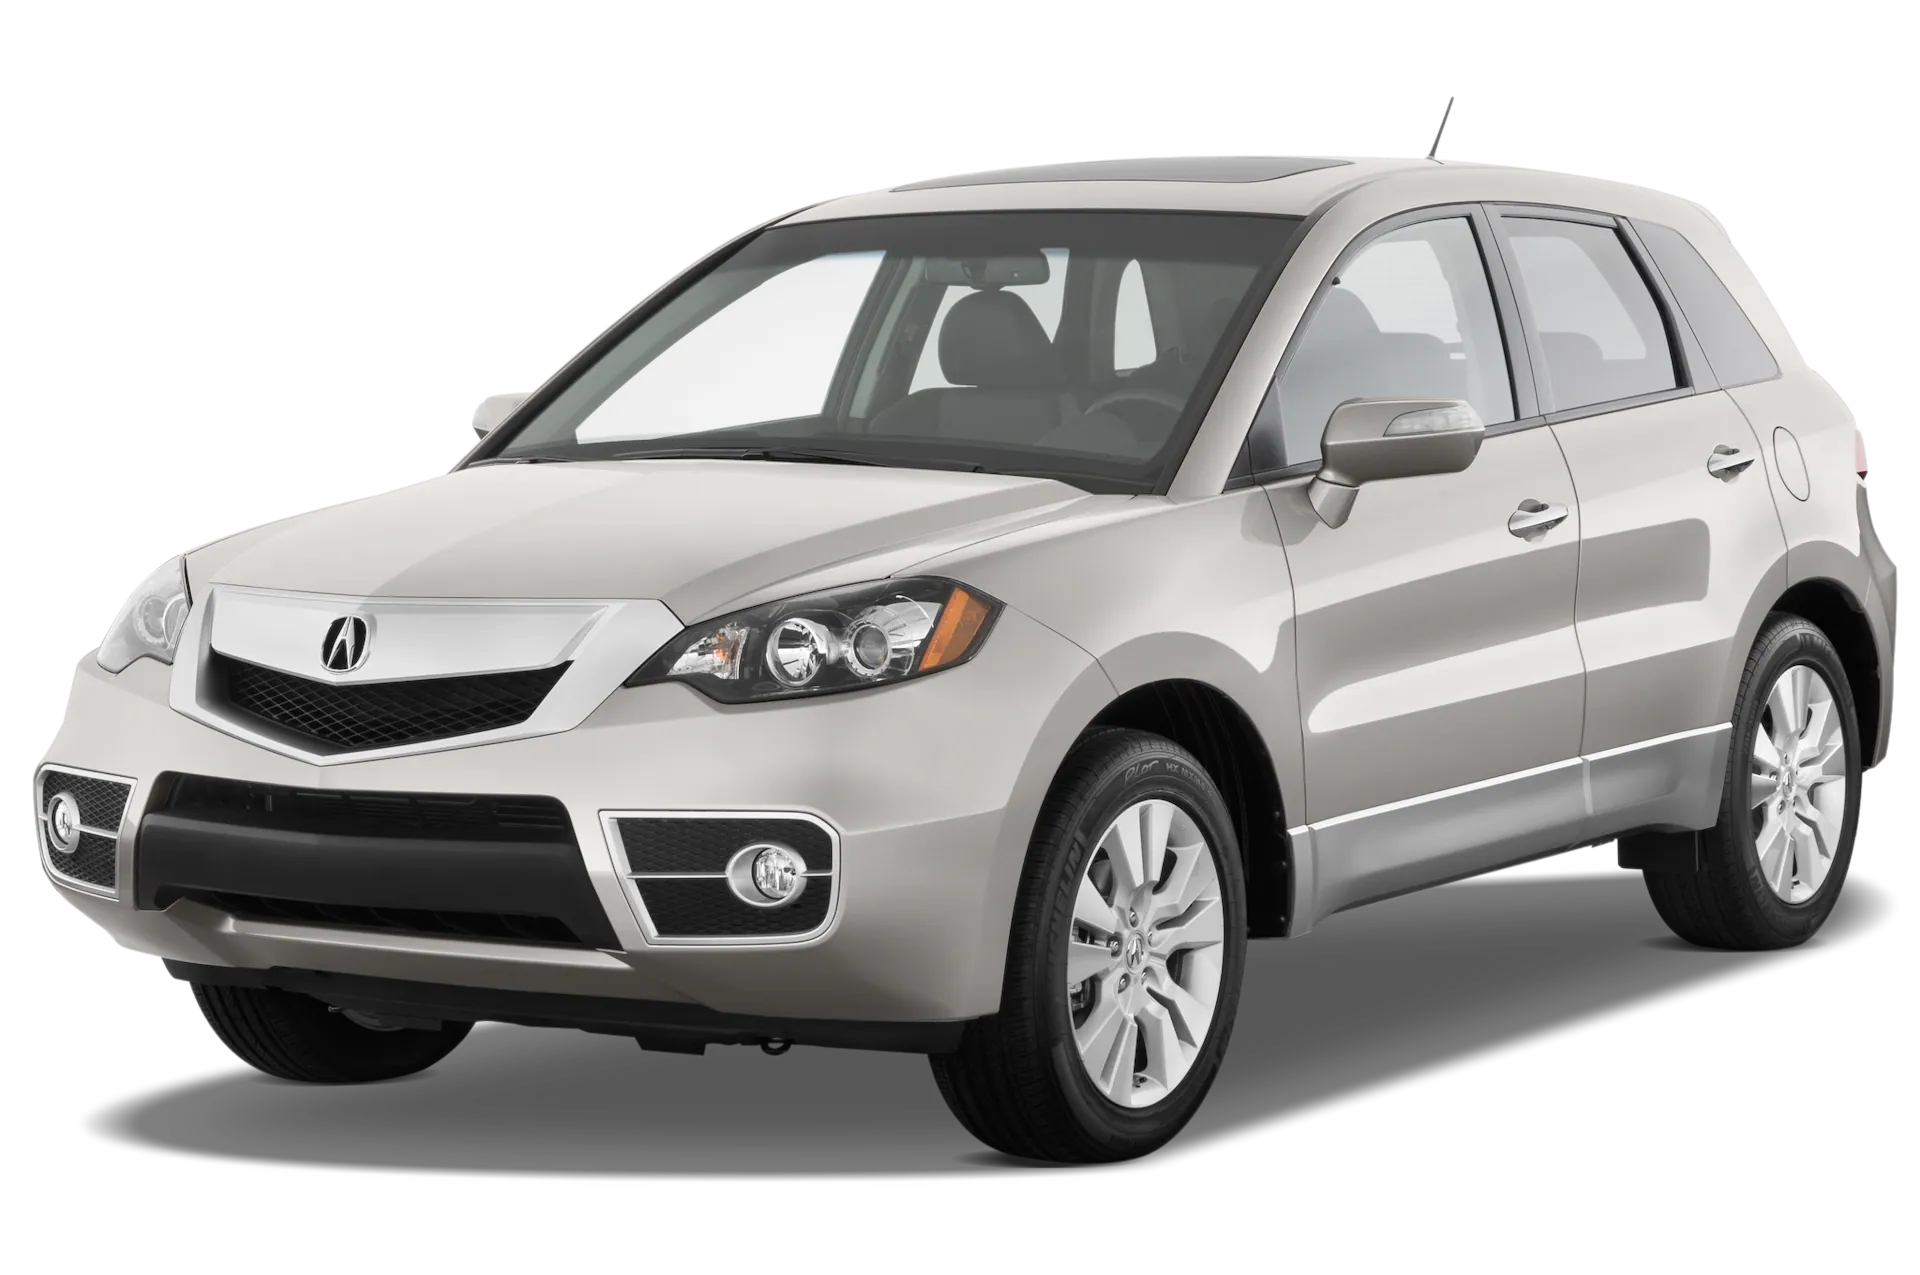 2012 Acura Rdx oem parts and accessories on sale